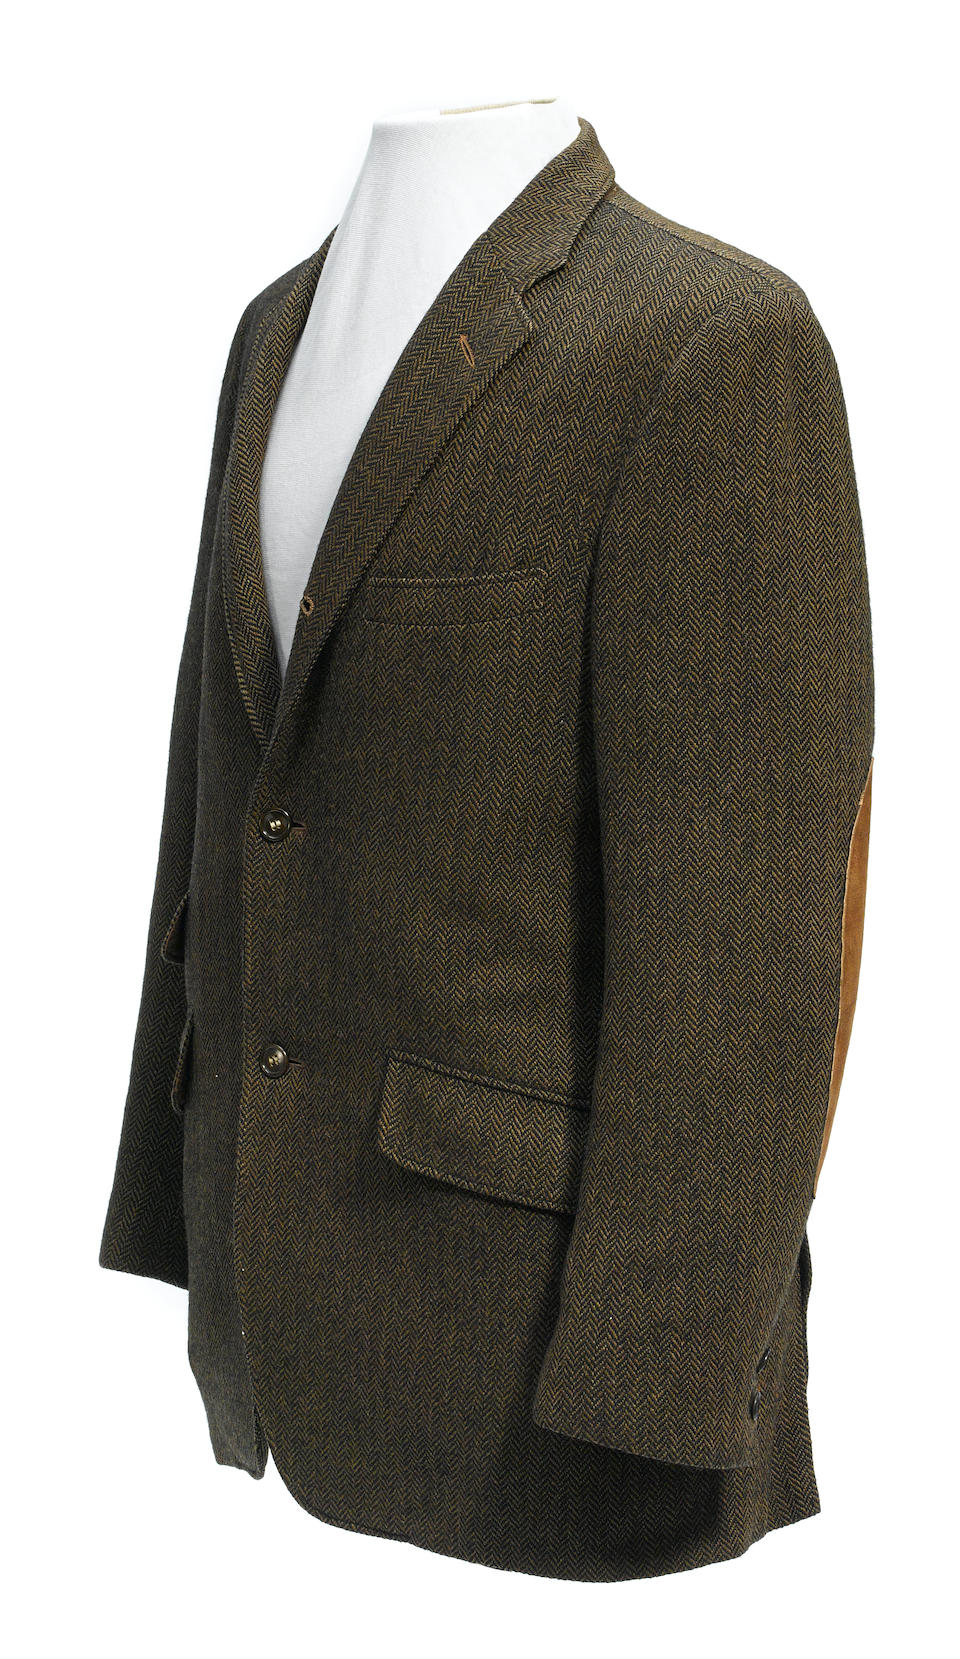 From The Chad McQueen Collection The Bullitt  Jacket